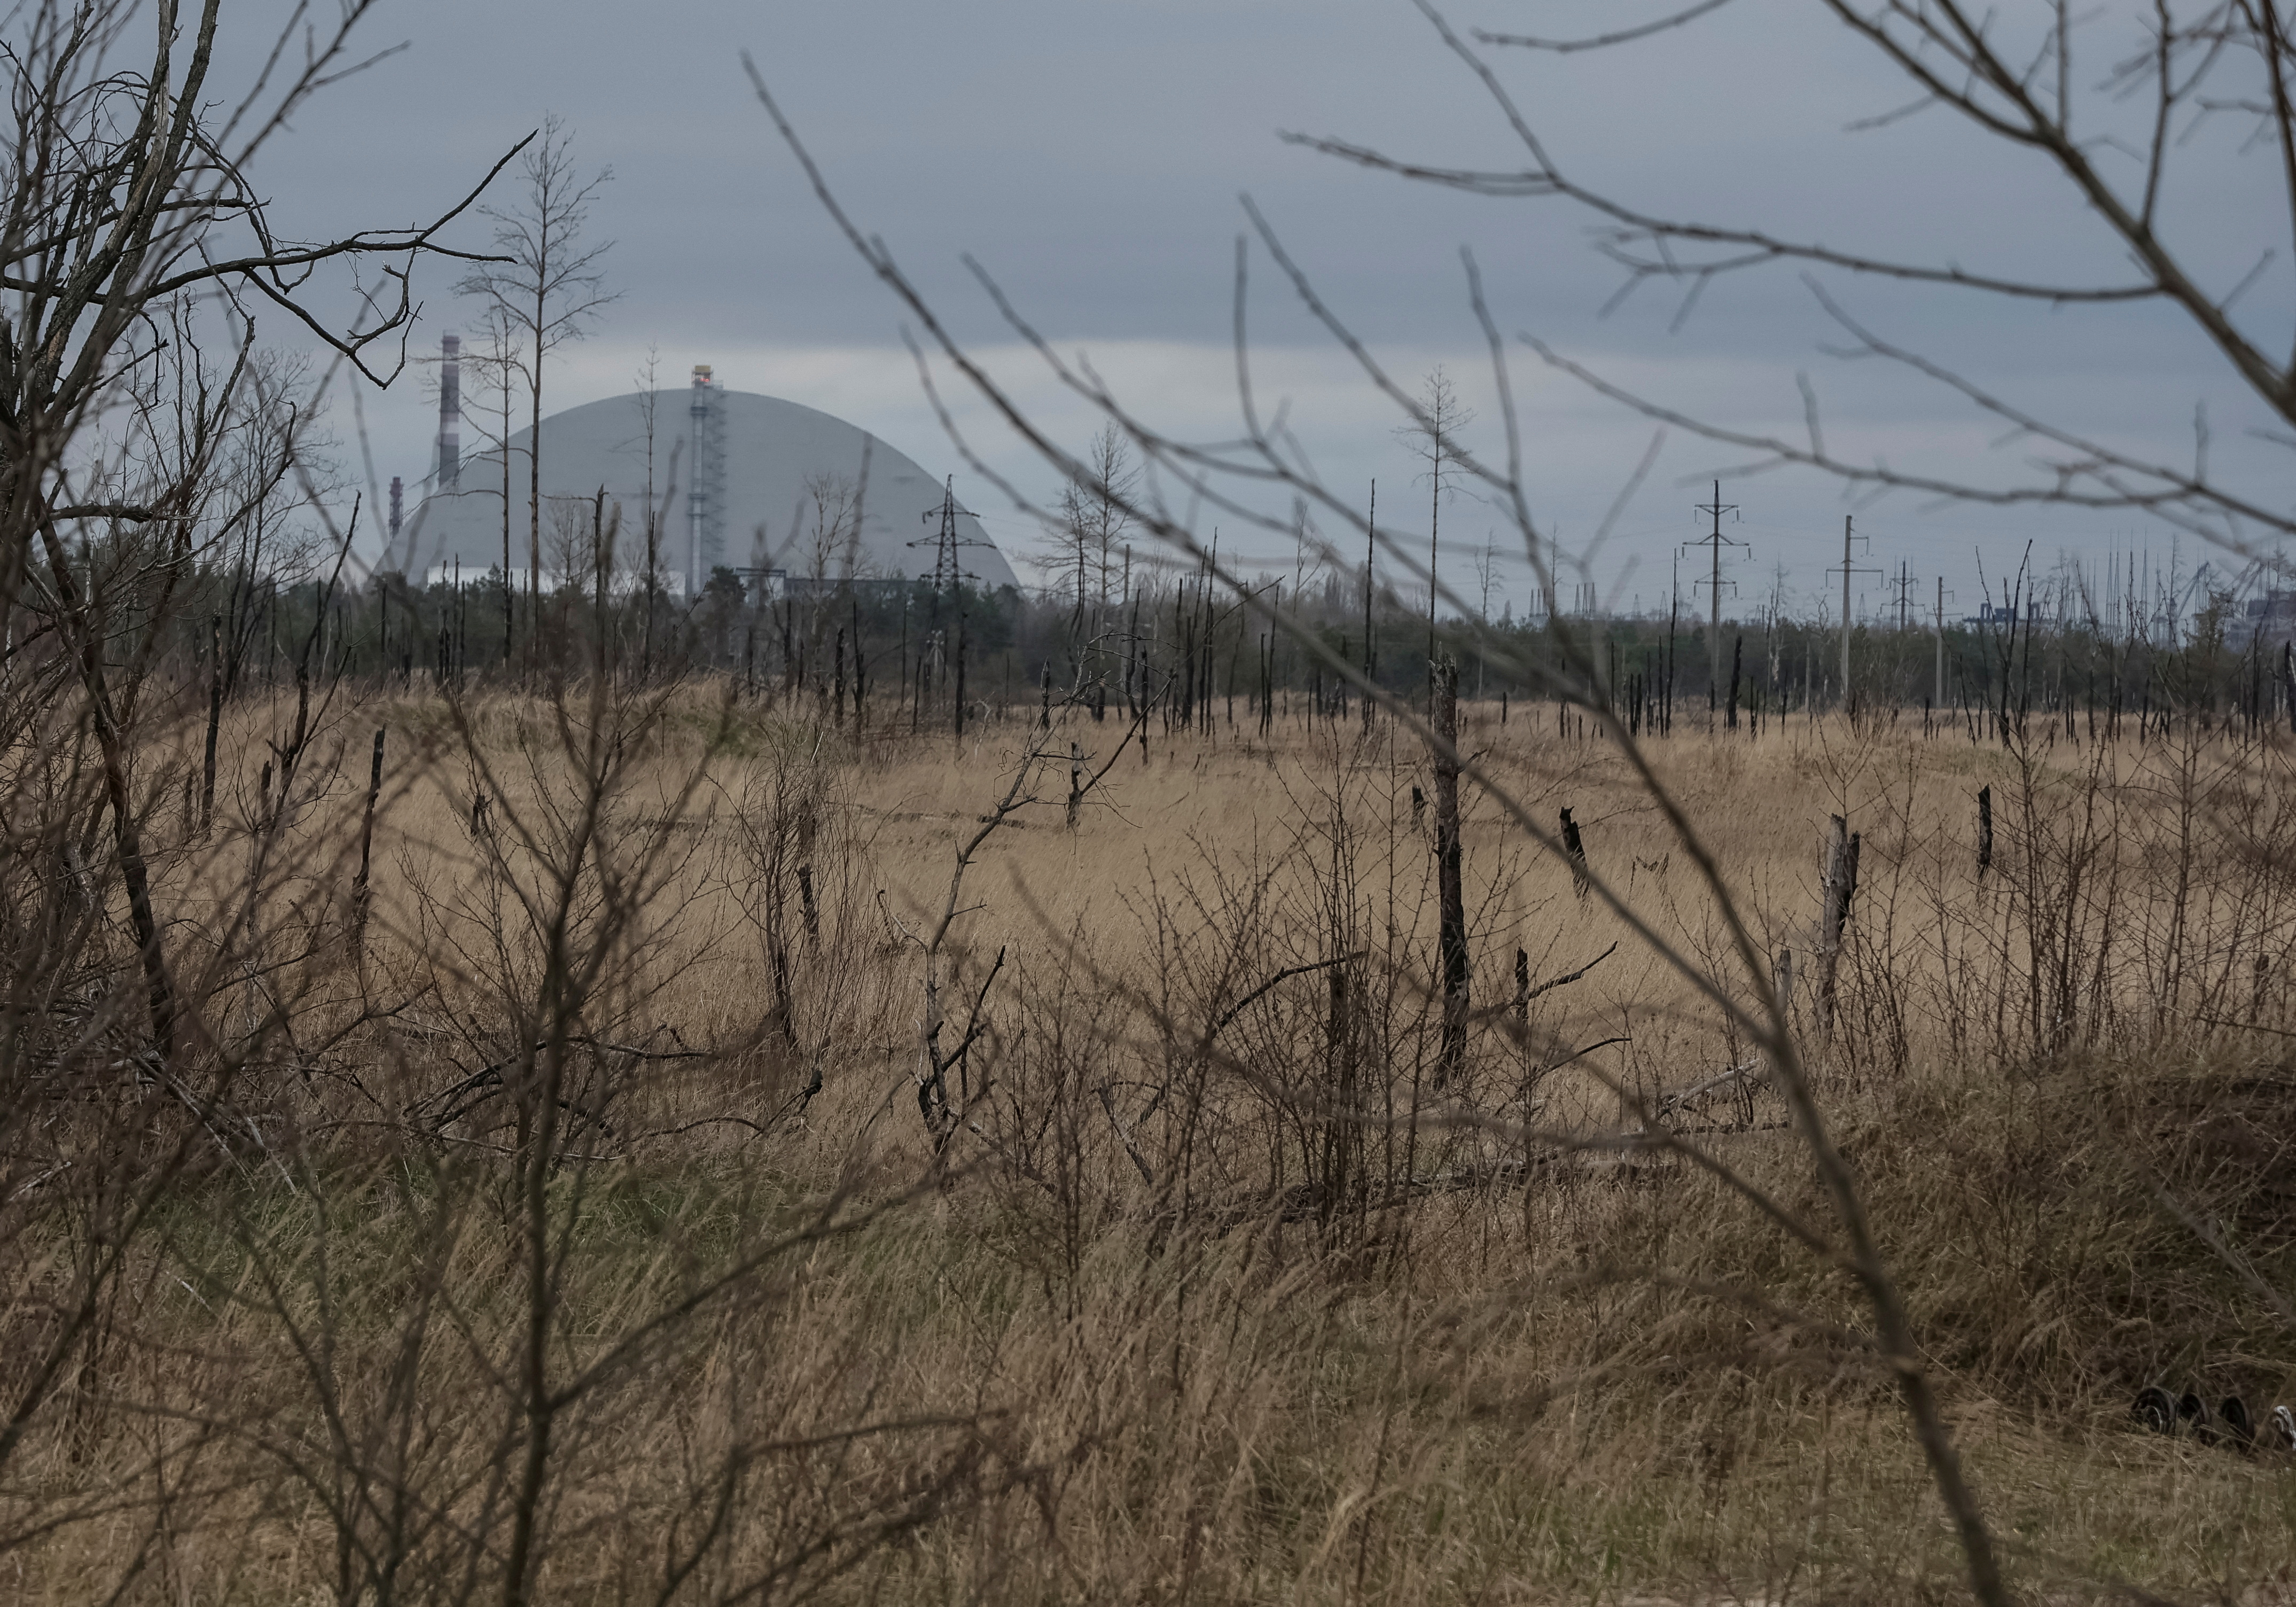 A general view shows an area with high levels of radiation called the Red Forest, and the New Safe Confinement (NSC) structure over the old sarcophagus covering the damaged fourth reactor at the Chornobyl Nuclear Power Plant, in Chornobyl